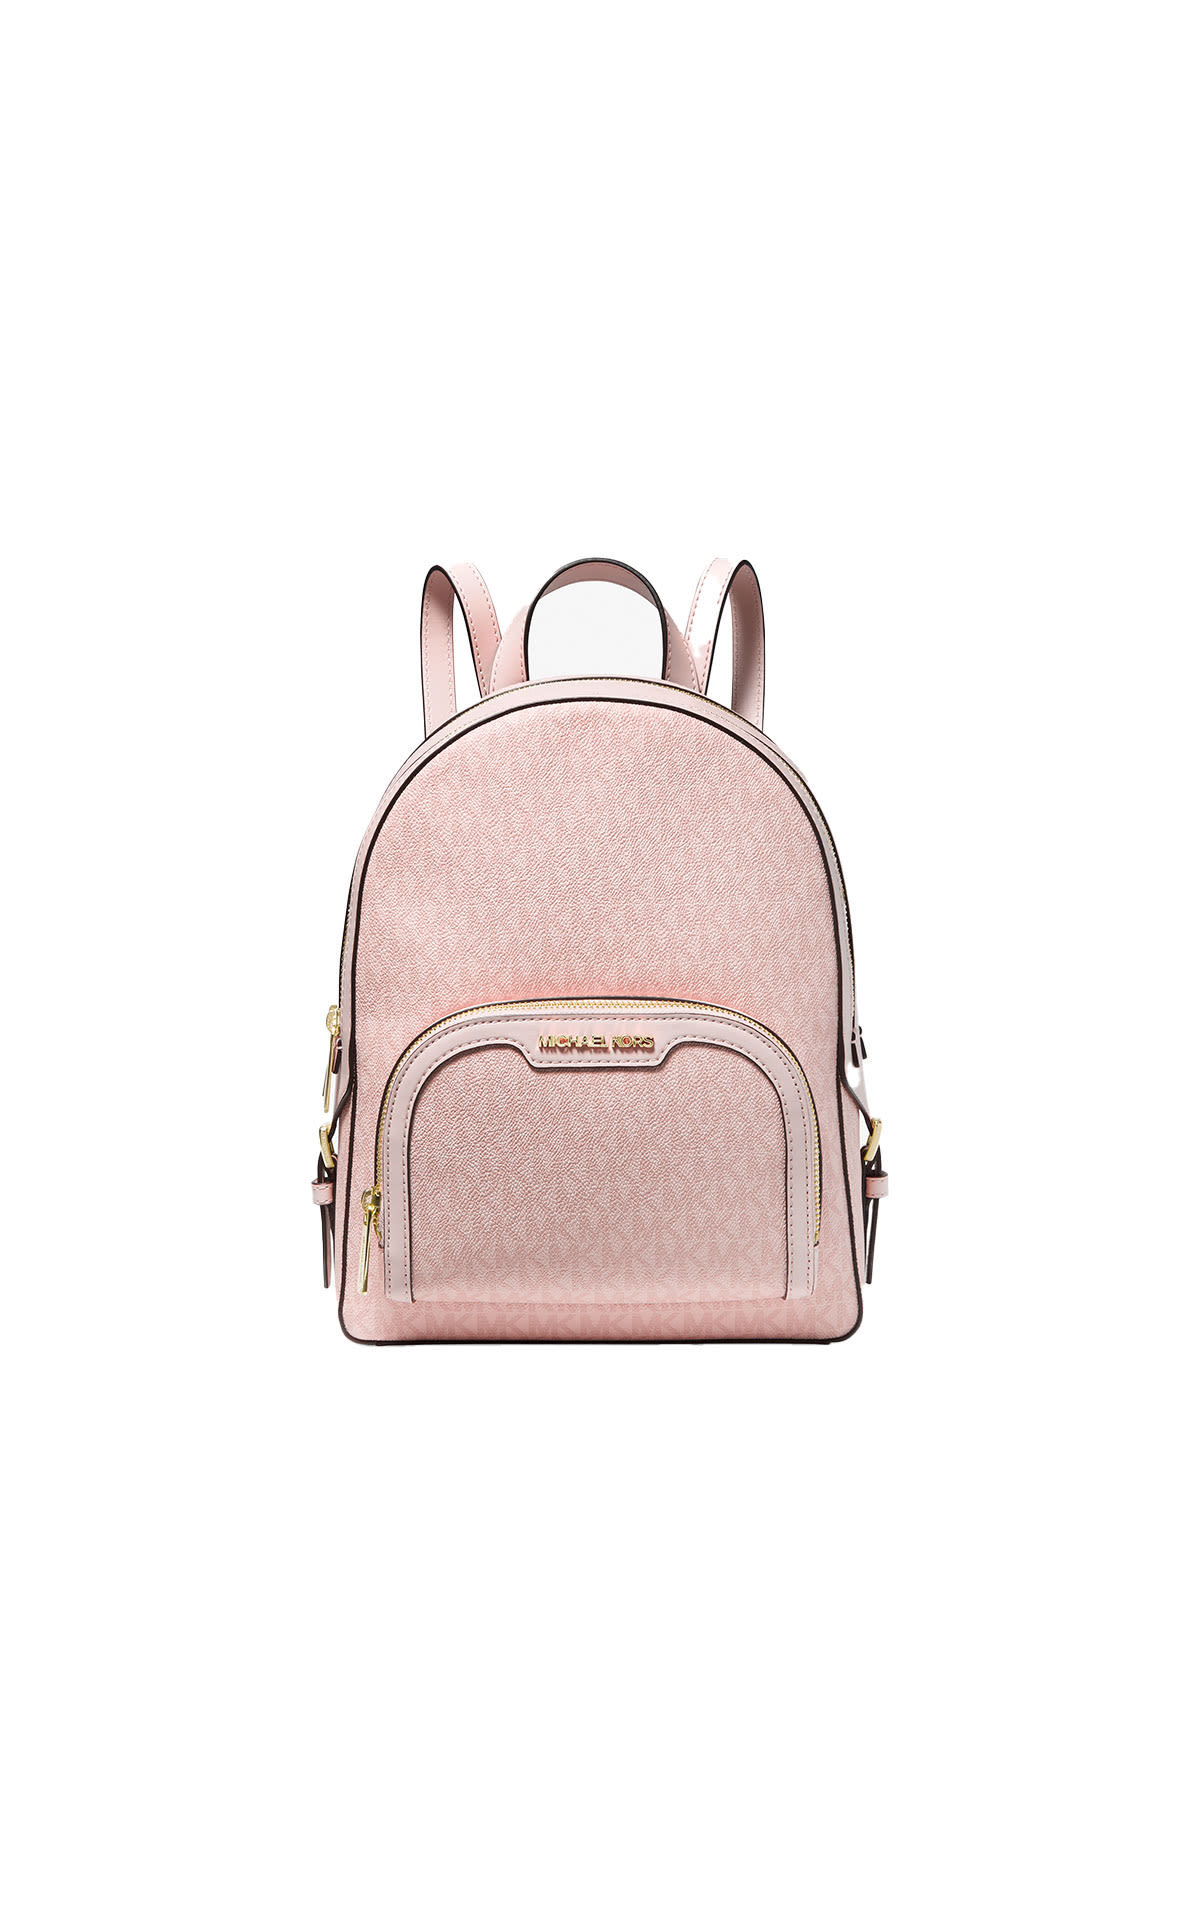 Michael Kors  Jaycee backpack from Bicester Village